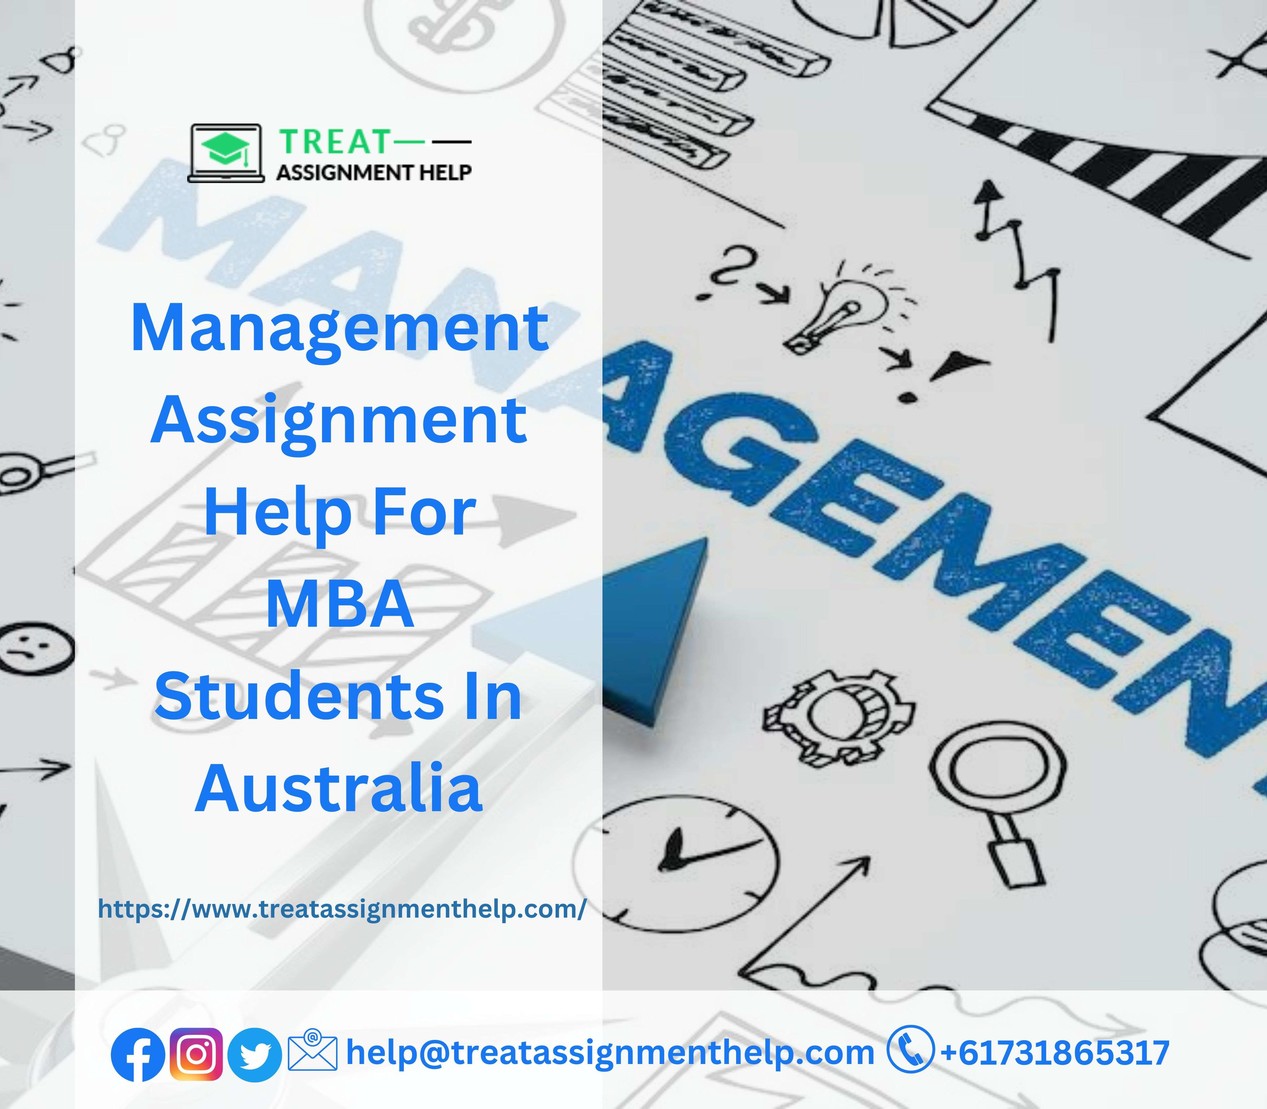 Management Assignment Help For MBA Students In Australia